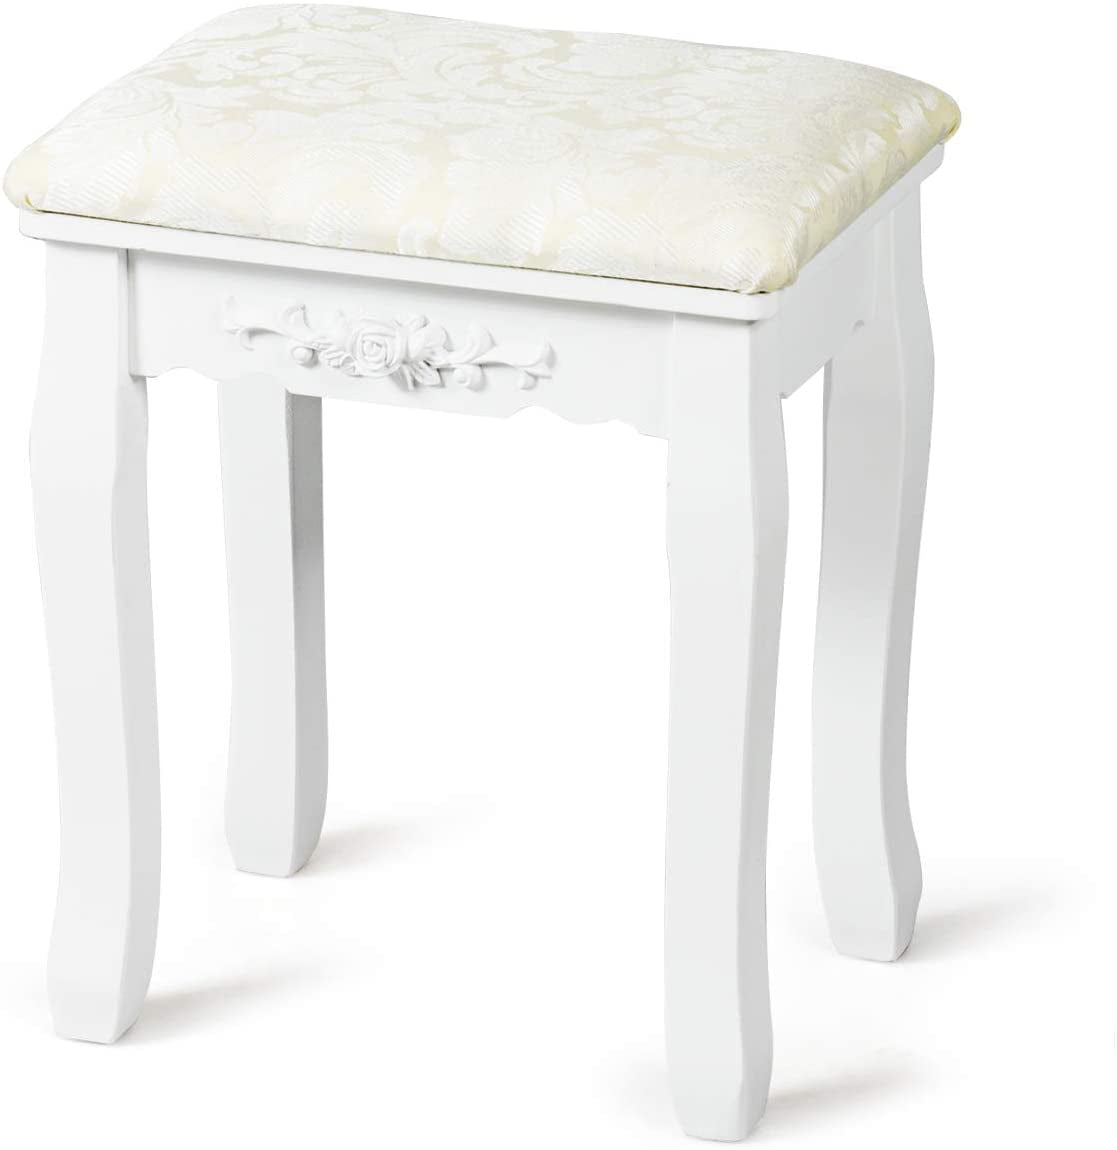 Piano Stool Bedroom Padded Dressing Table Dresser Vanity Cream Baroque Cushion Makeup Seat Chair Wall Lights Indoor 